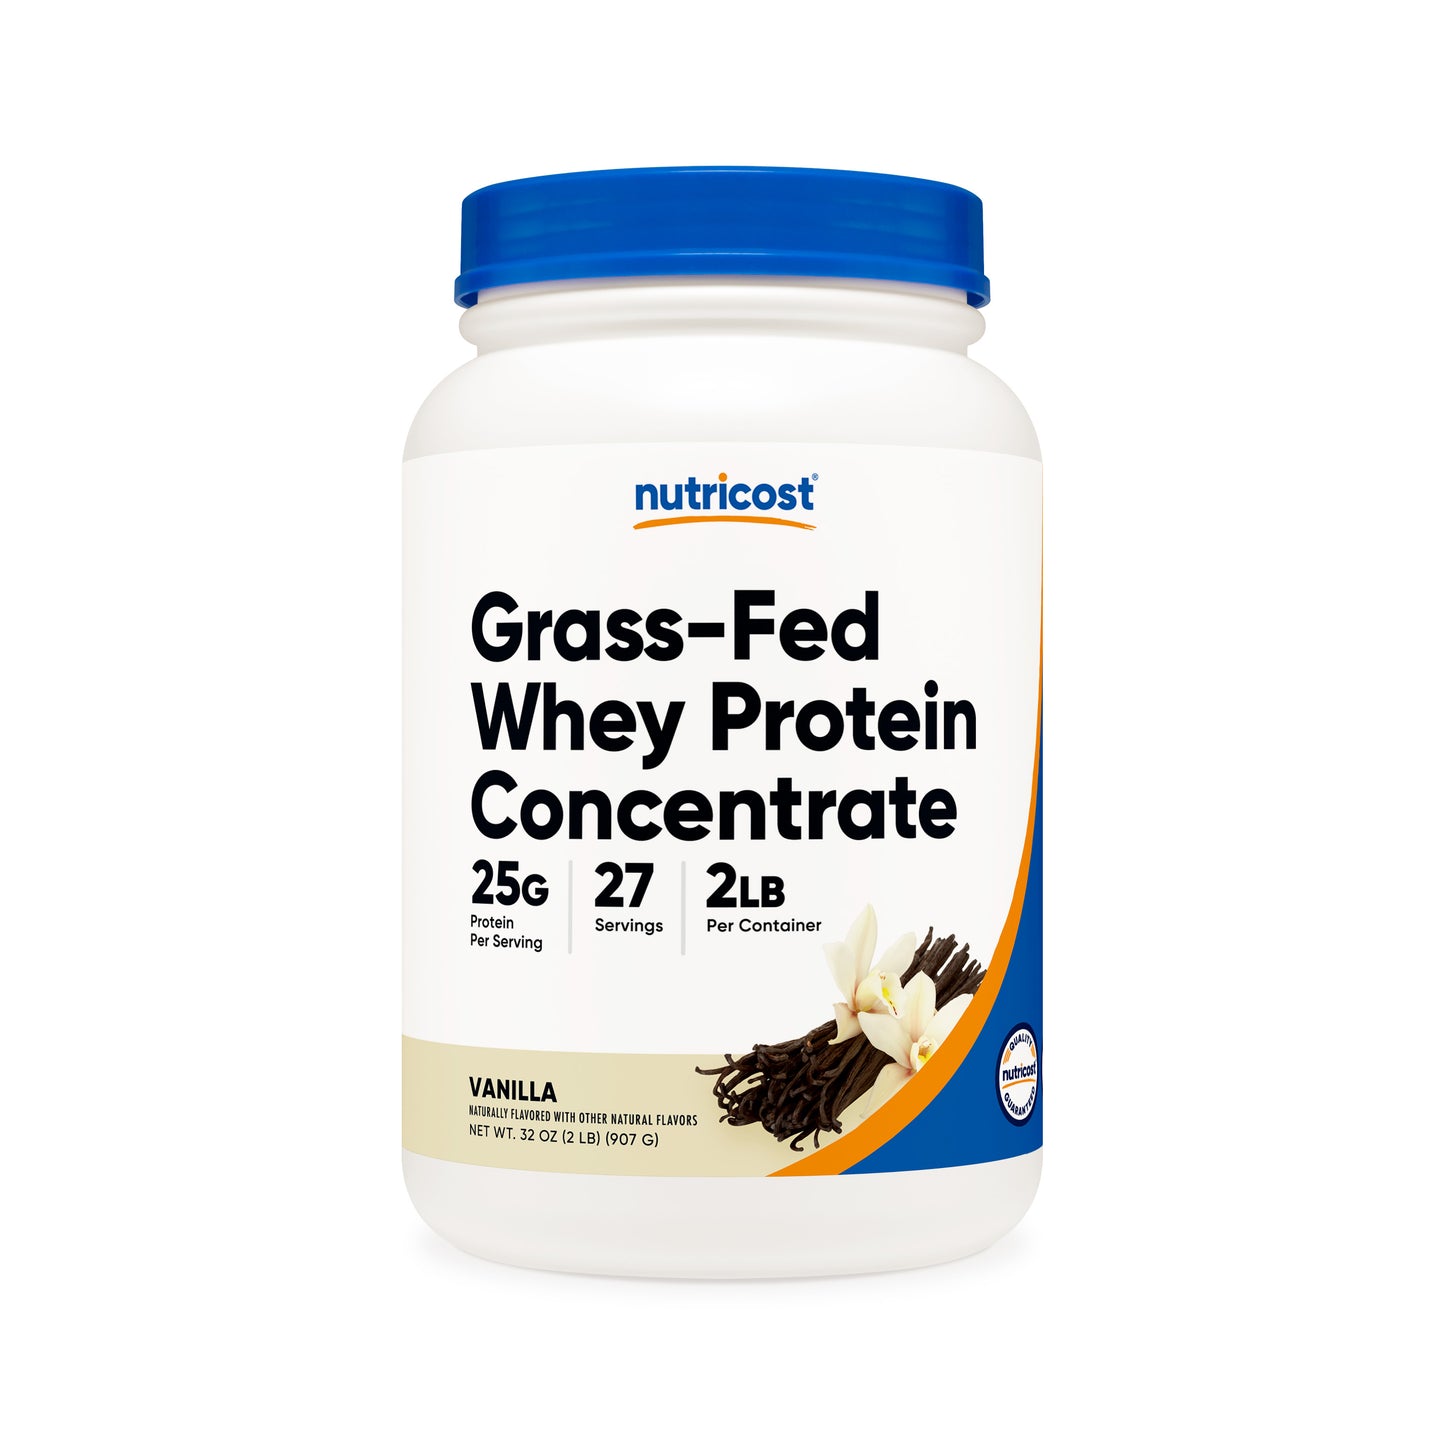 Nutricost Grass-Fed Whey Protein Concentrate Powder